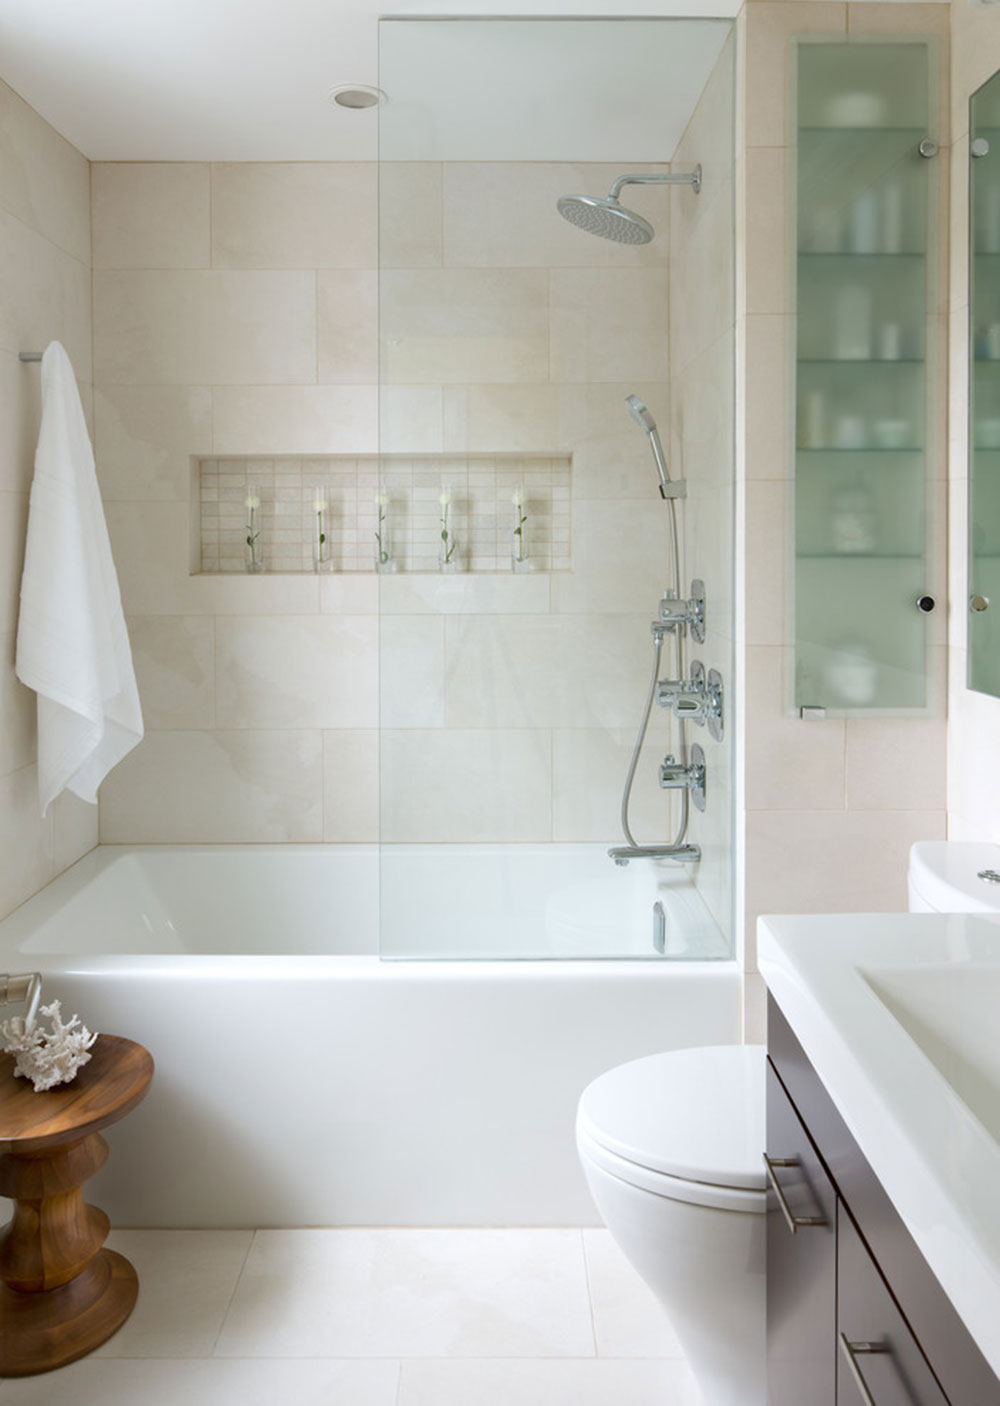 Small-Space-Bathroom-by-Toronto-Interior-Design-Group-Yanic-Simard The definitive guide on how to decorate a bathroom